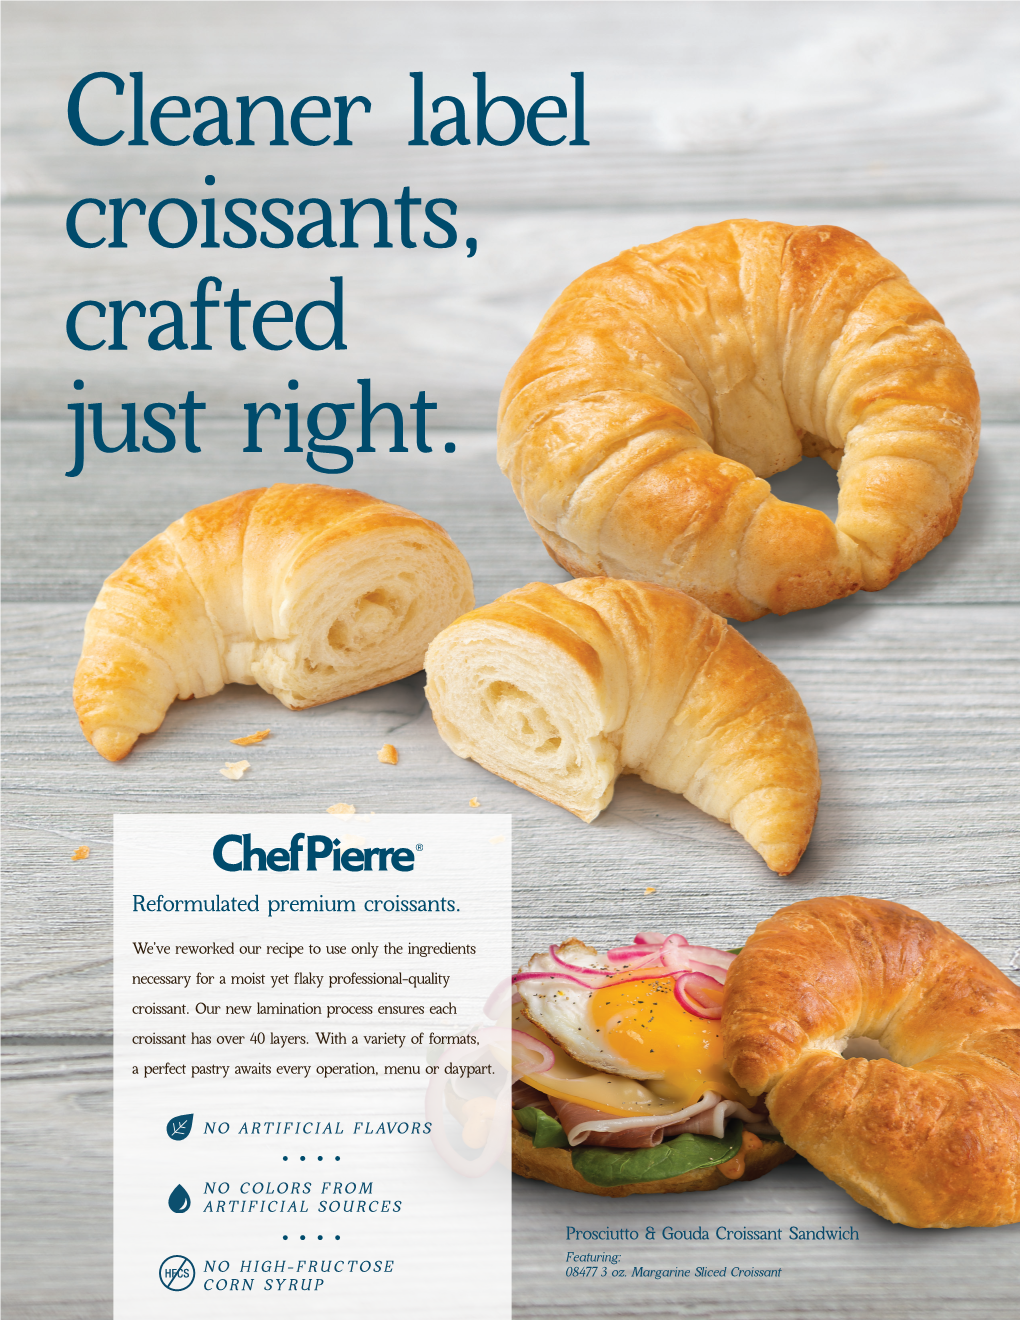 Reformulated Premium Croissants. We've Reworked Our Recipe to Use Only the Ingredients Necessary for a Moist Yet Flaky Professional-Quality Croissant